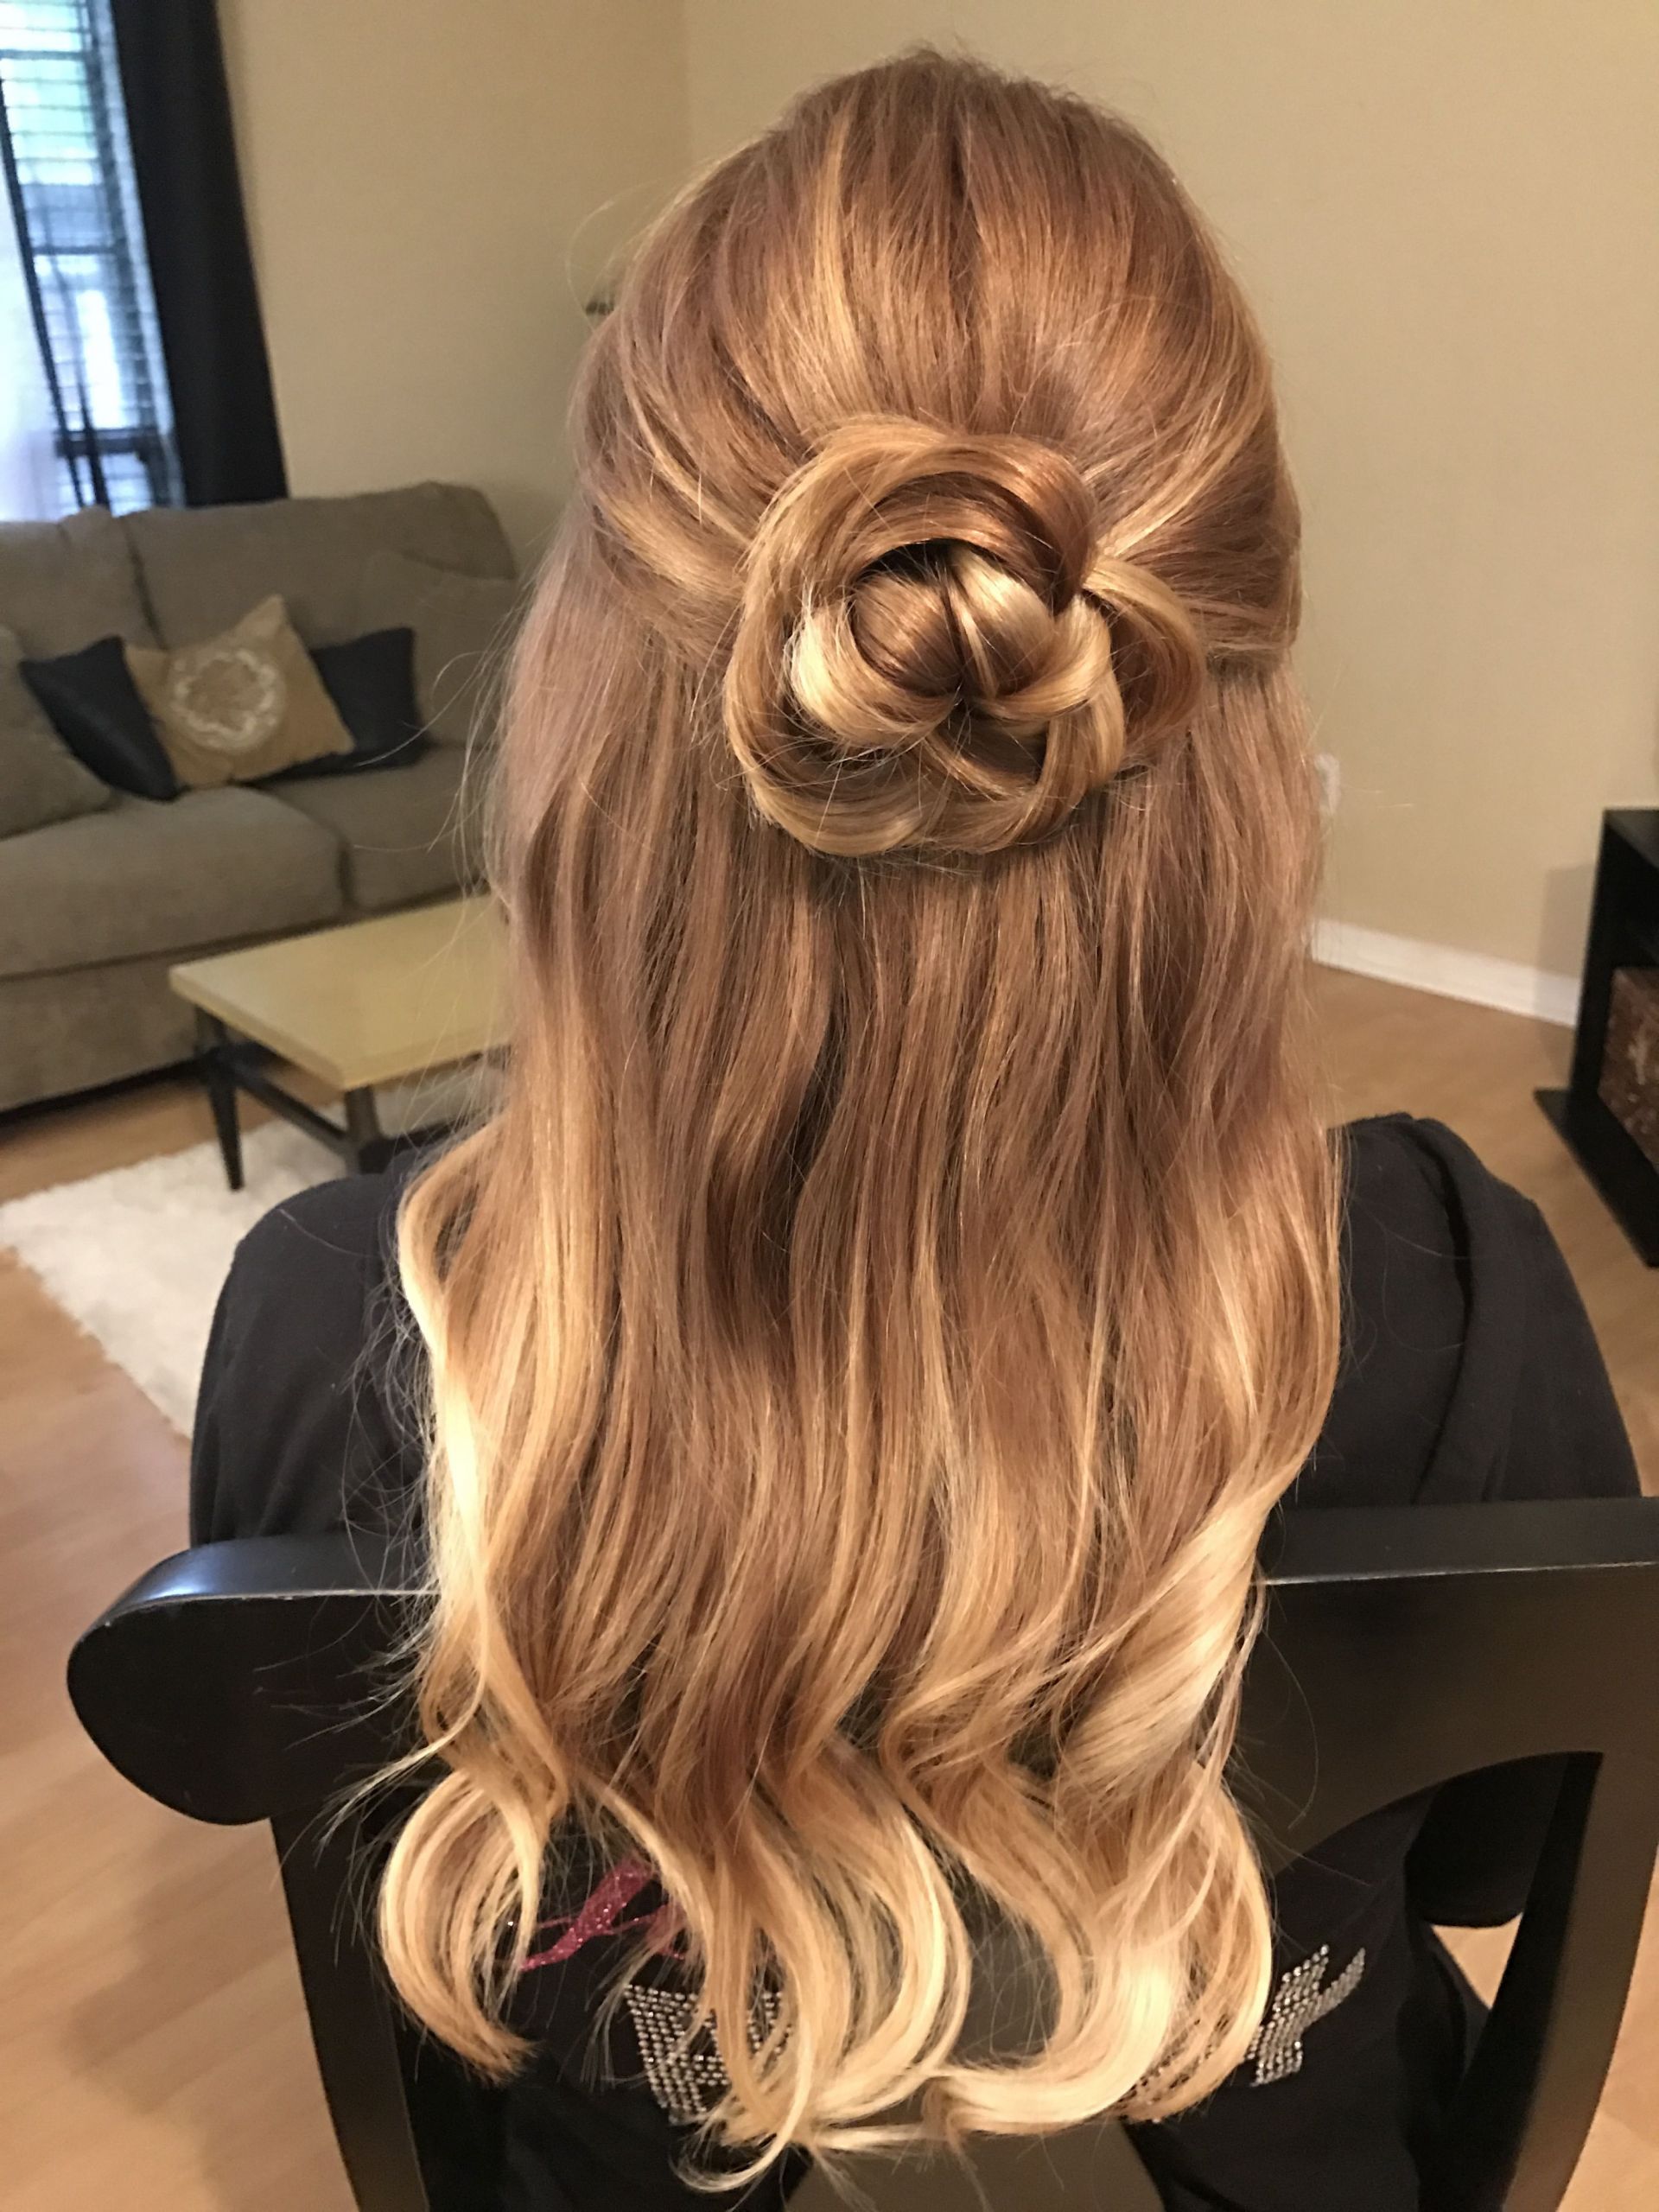 Half Up Half Down Curled Prom Hairstyles
 Rose flower hair updo half up half down hairstyle for prom